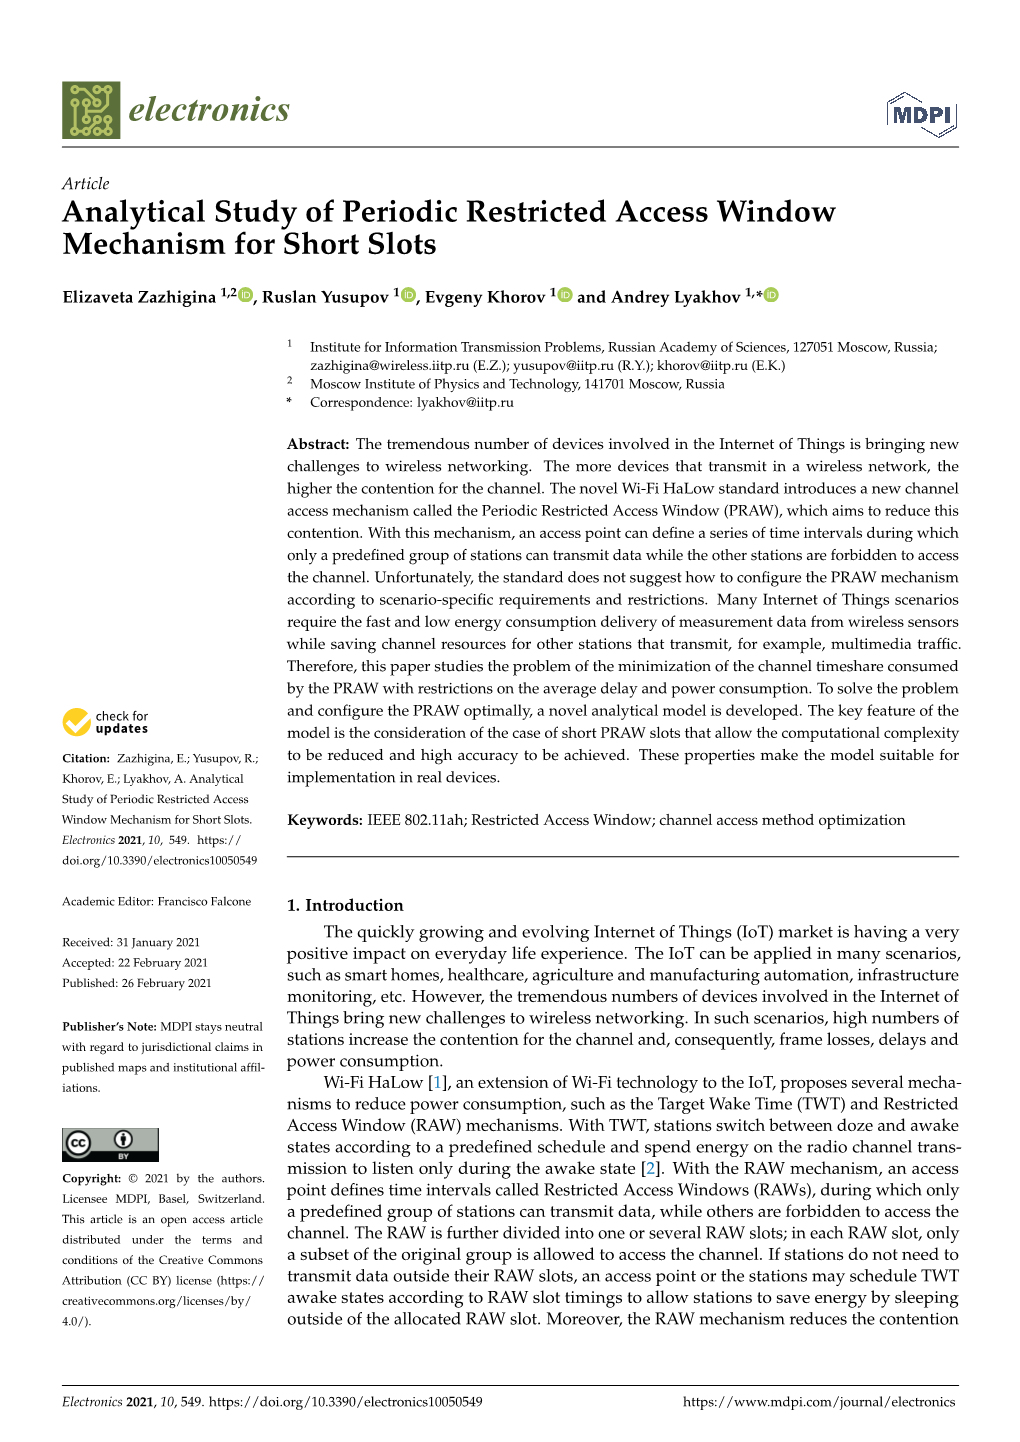 Analytical Study of Periodic Restricted Access Window Mechanism for Short Slots